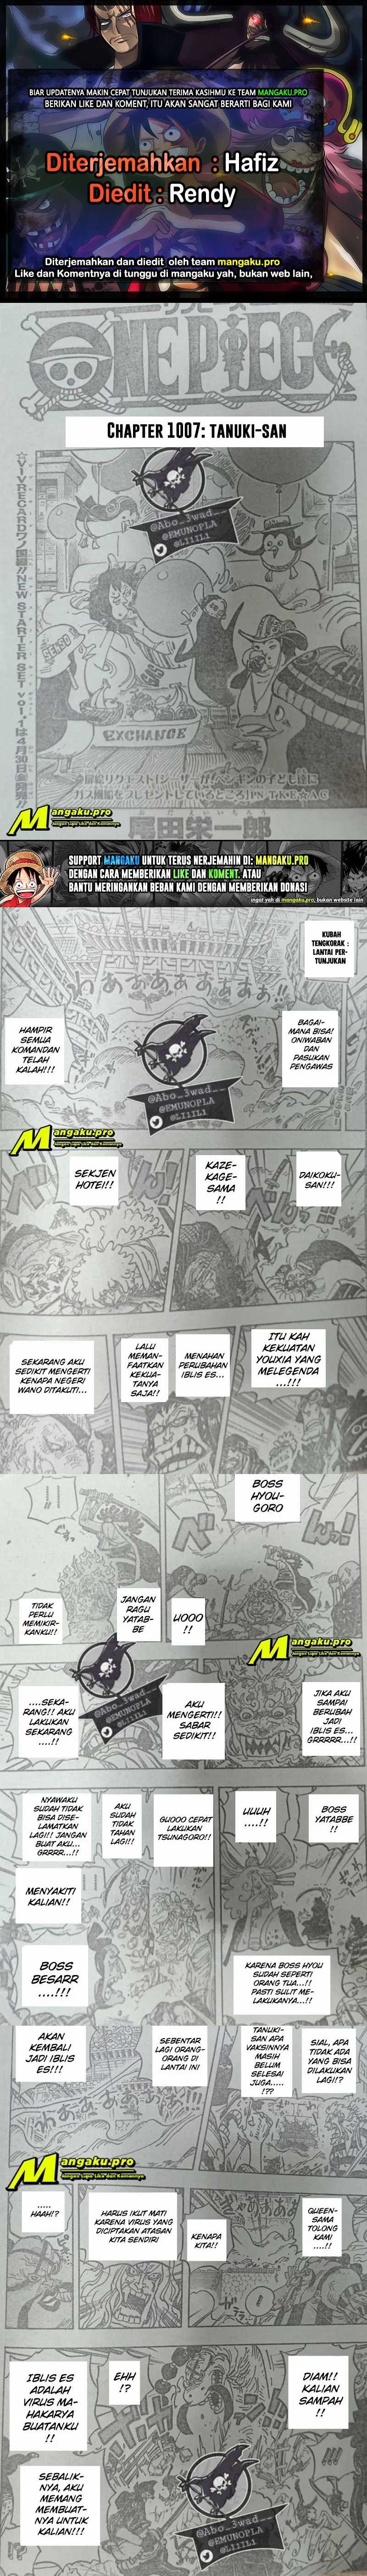 One Piece Chapter 1007 Lq - 31